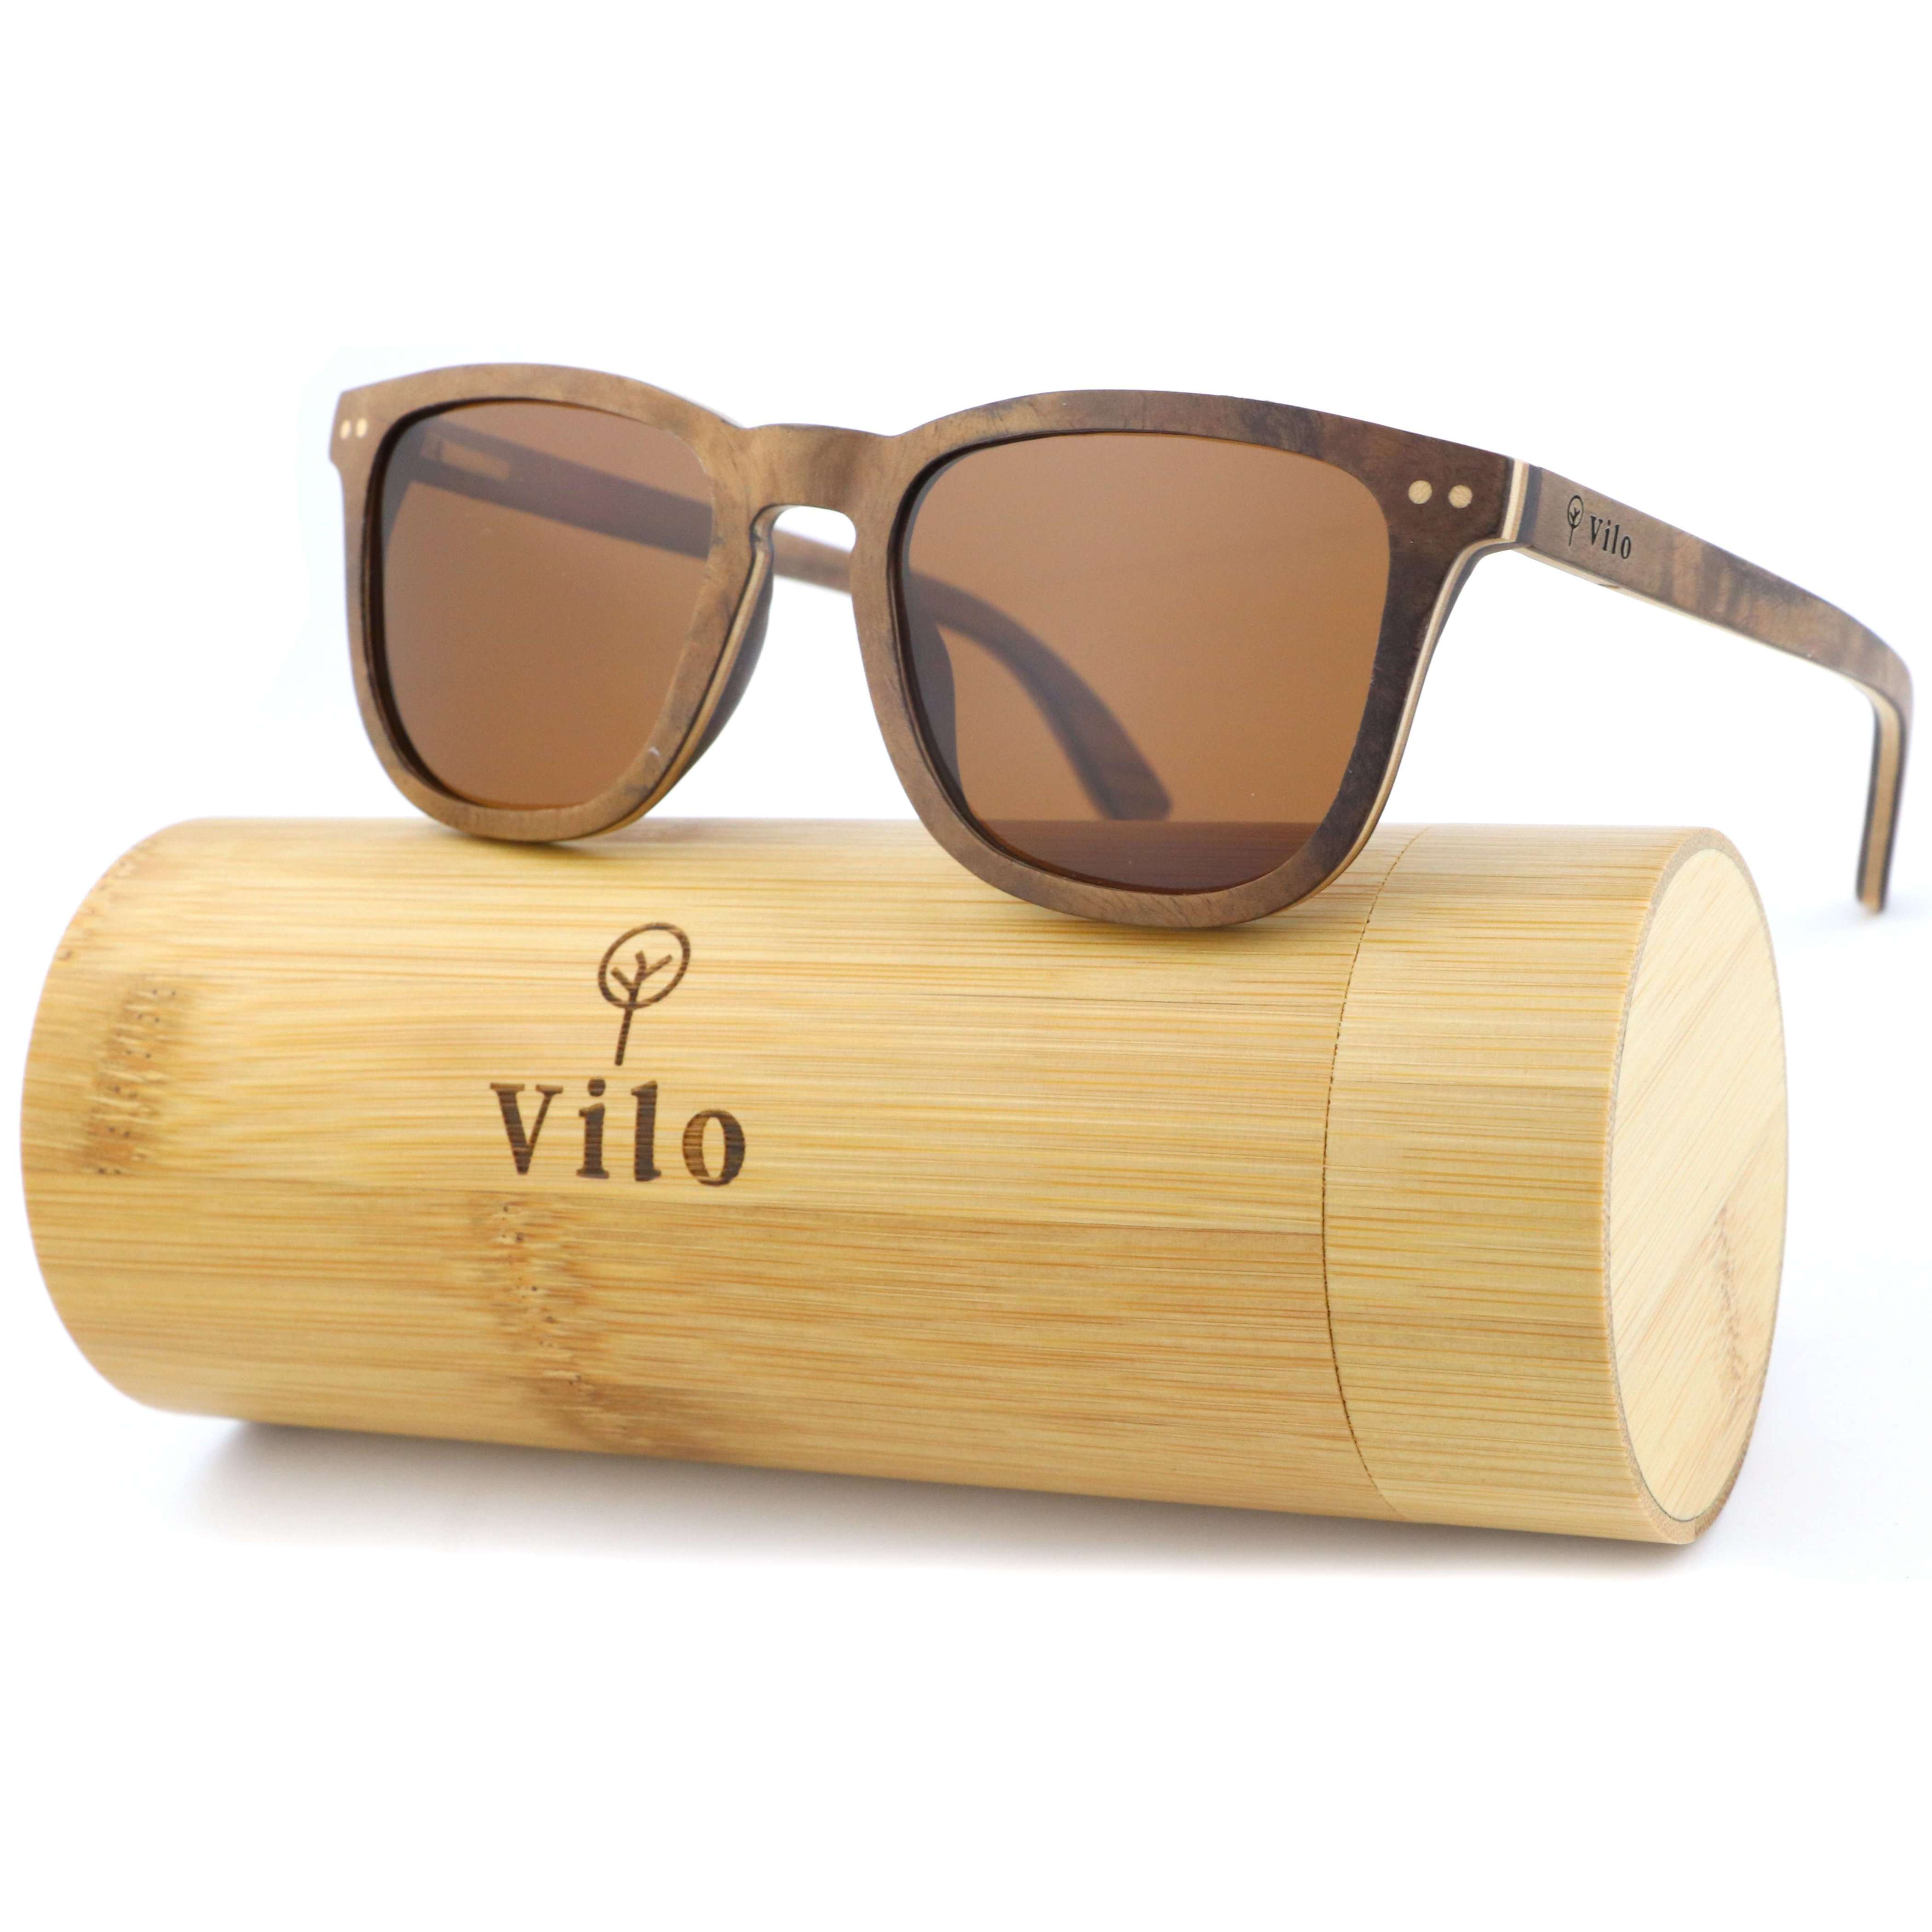 Cloudfield Wooden Sunglasses for Men and Women - Polarized Green / Blue  Lenses with Bamboo Wooden Frame - Double Layer of UV Blocking Coating -  Walmart.com